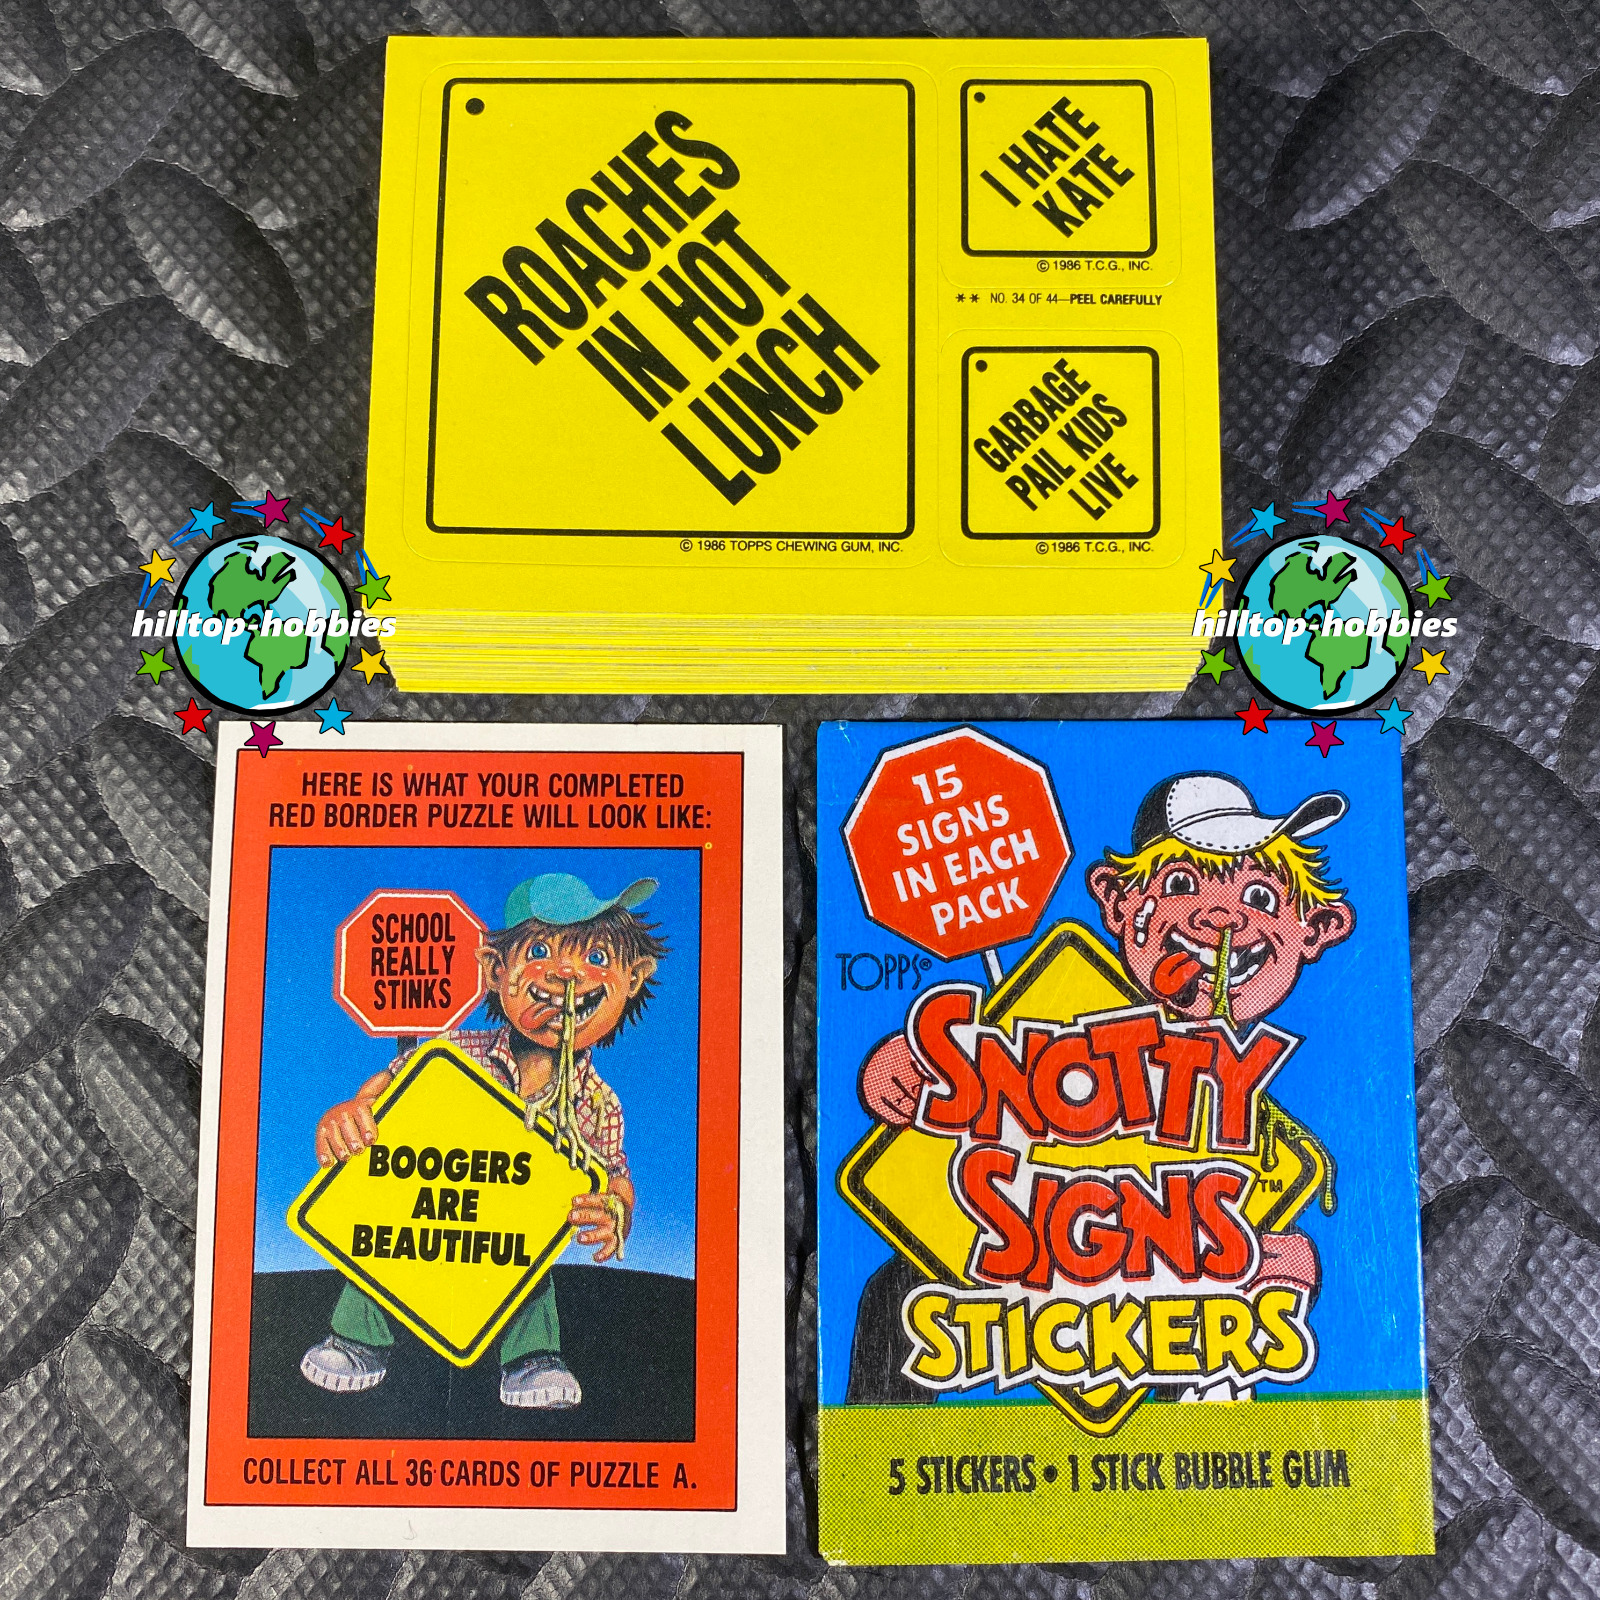 SNOTTY SIGNS 44-CARD COMPLETE SET +WRAPPER 1986 TOPPS like garbage pail kids gpk